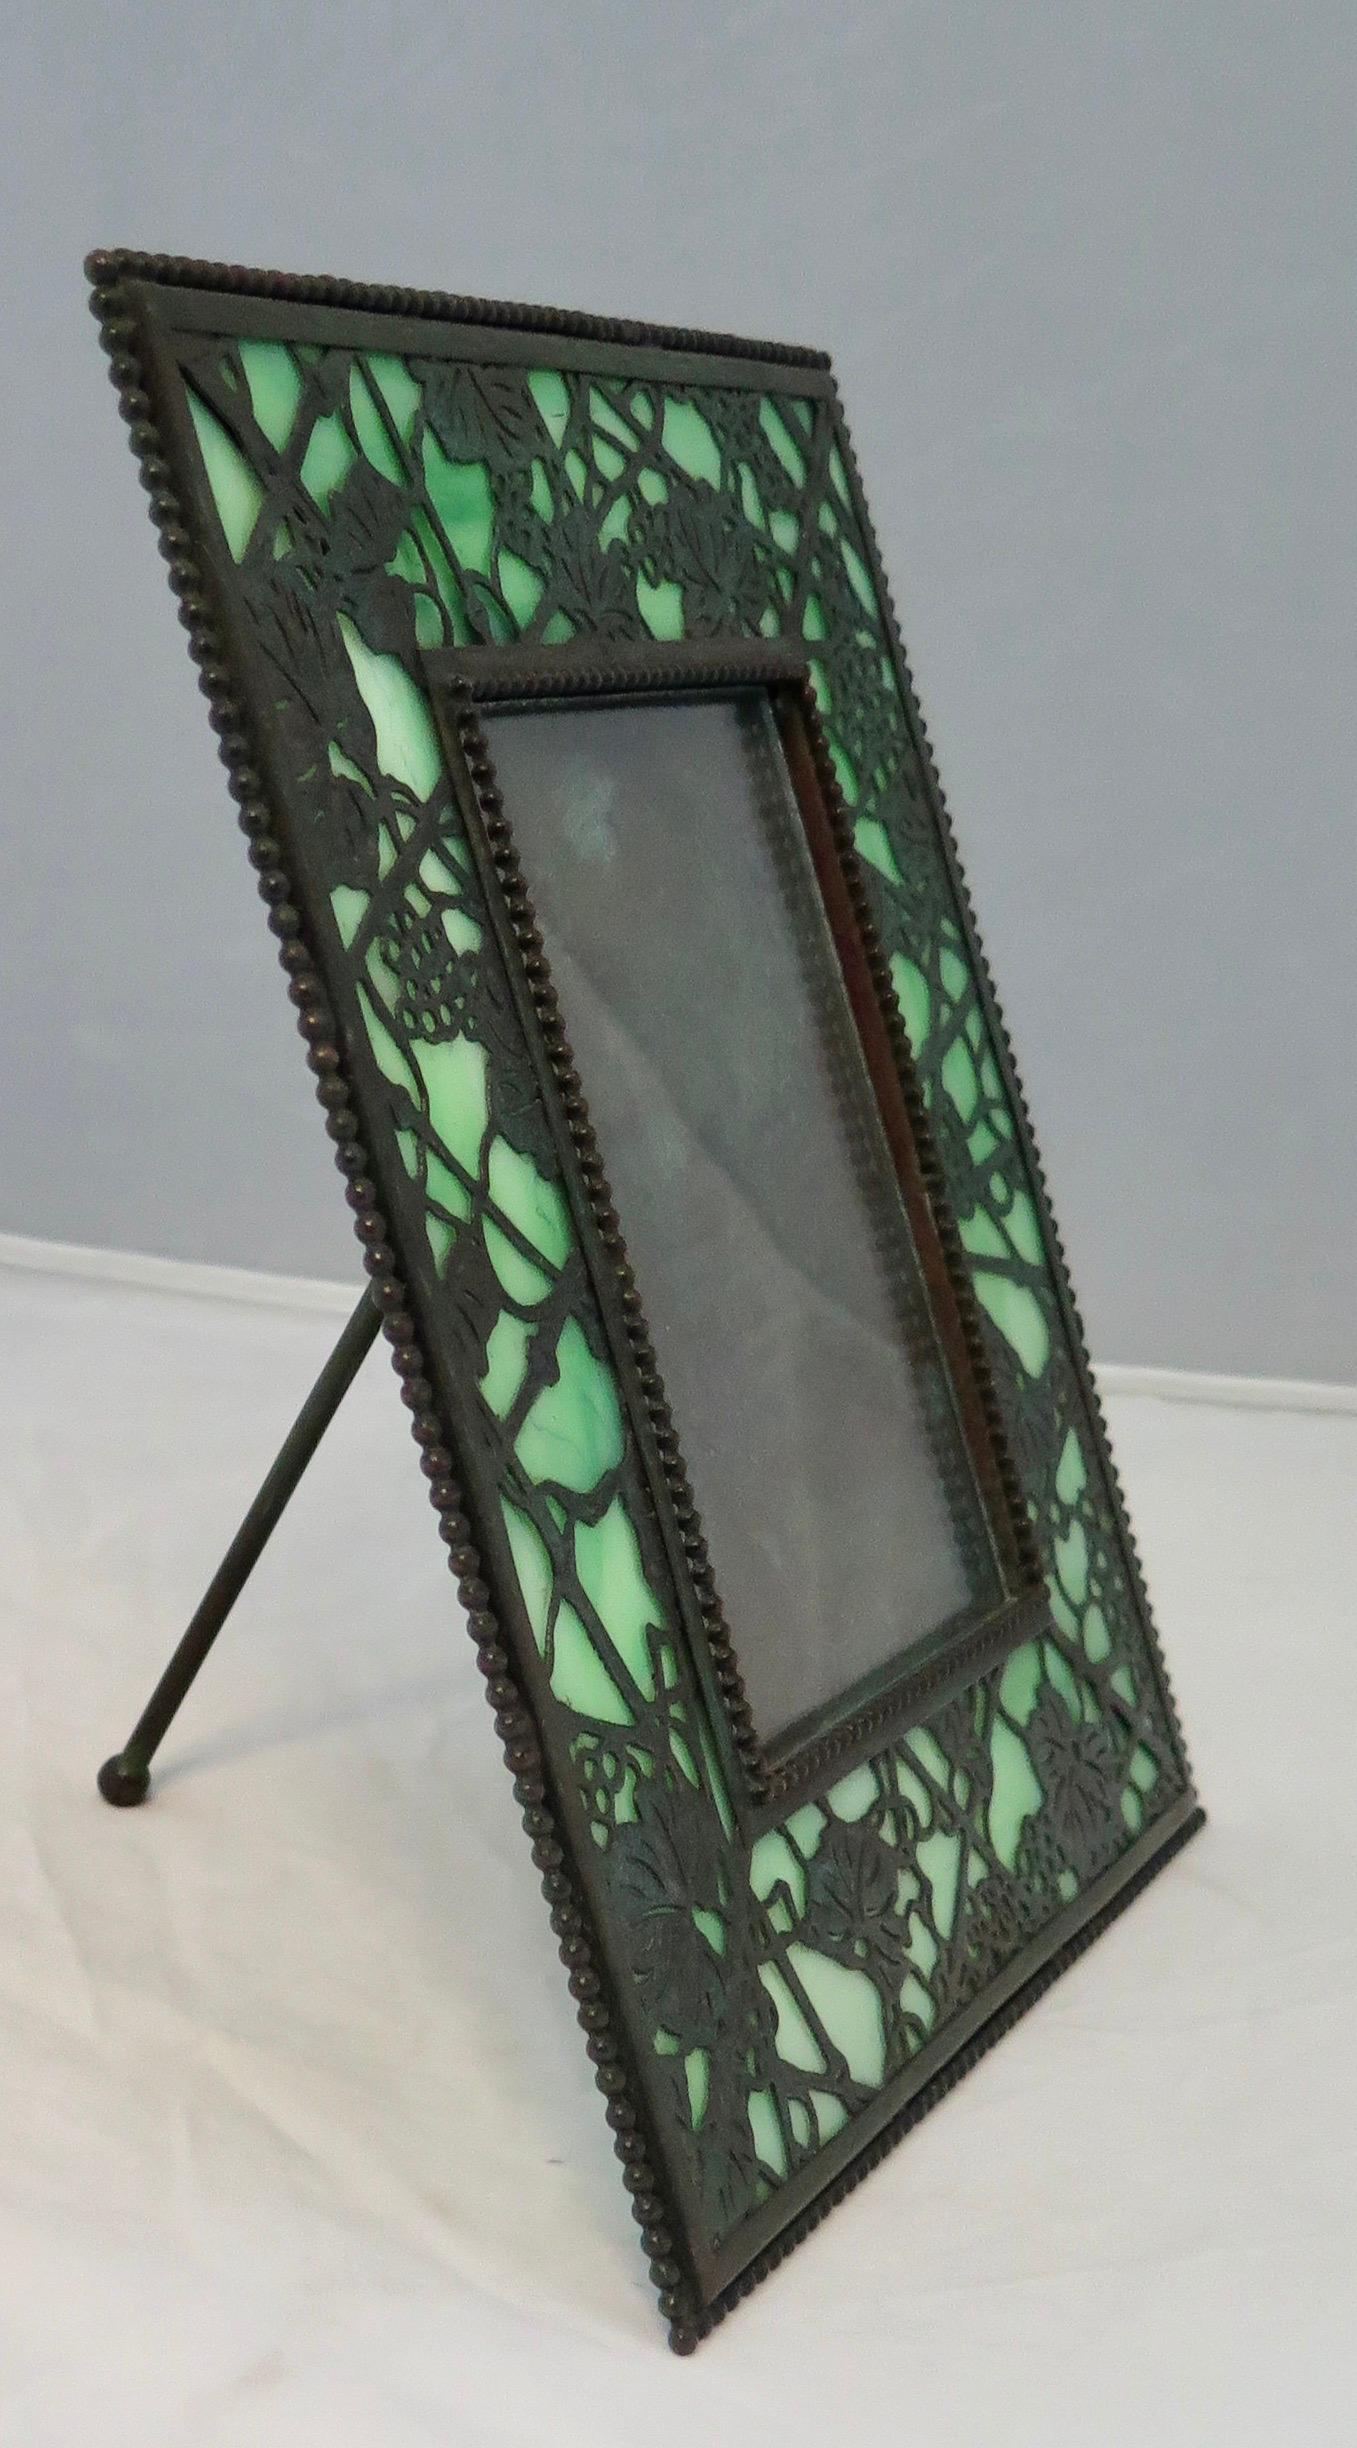 This vintage Tiffany Studios, New York photo frame is designed in the grapevine motif & dates from the early 20th century. The patinated bronze easel backed frame features an open work grapevine bronze overlaying Tiffany green favrile art glass.